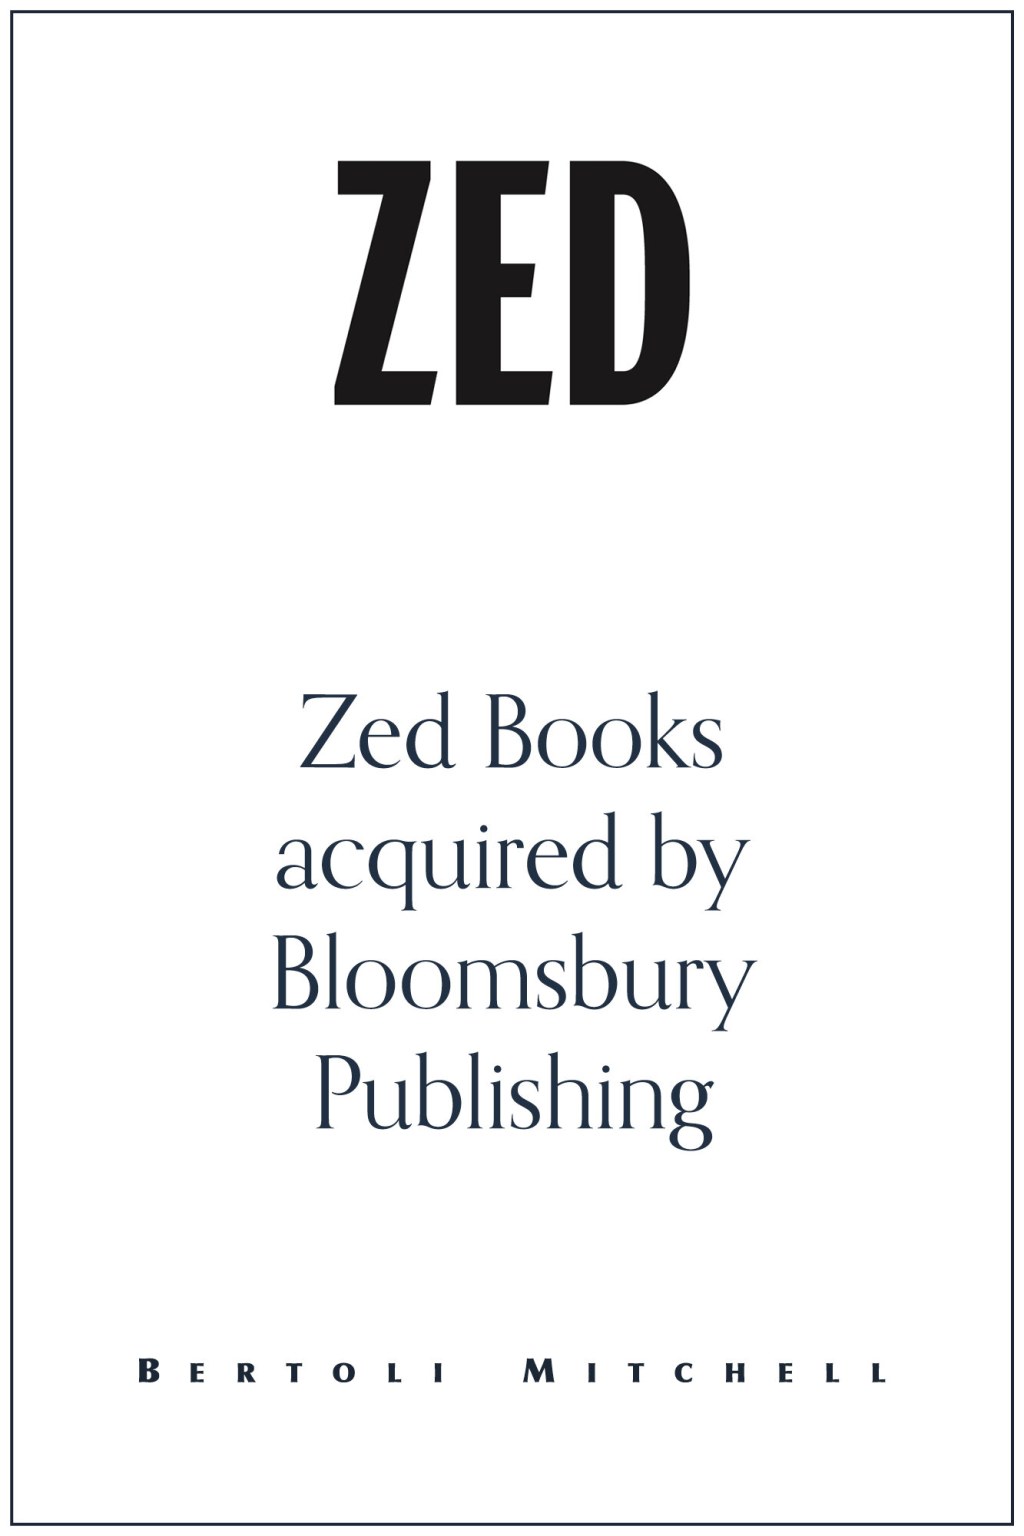 Picture of: Zed Books acquired by Bloomsbury Publishing — Bertoli Mitchell